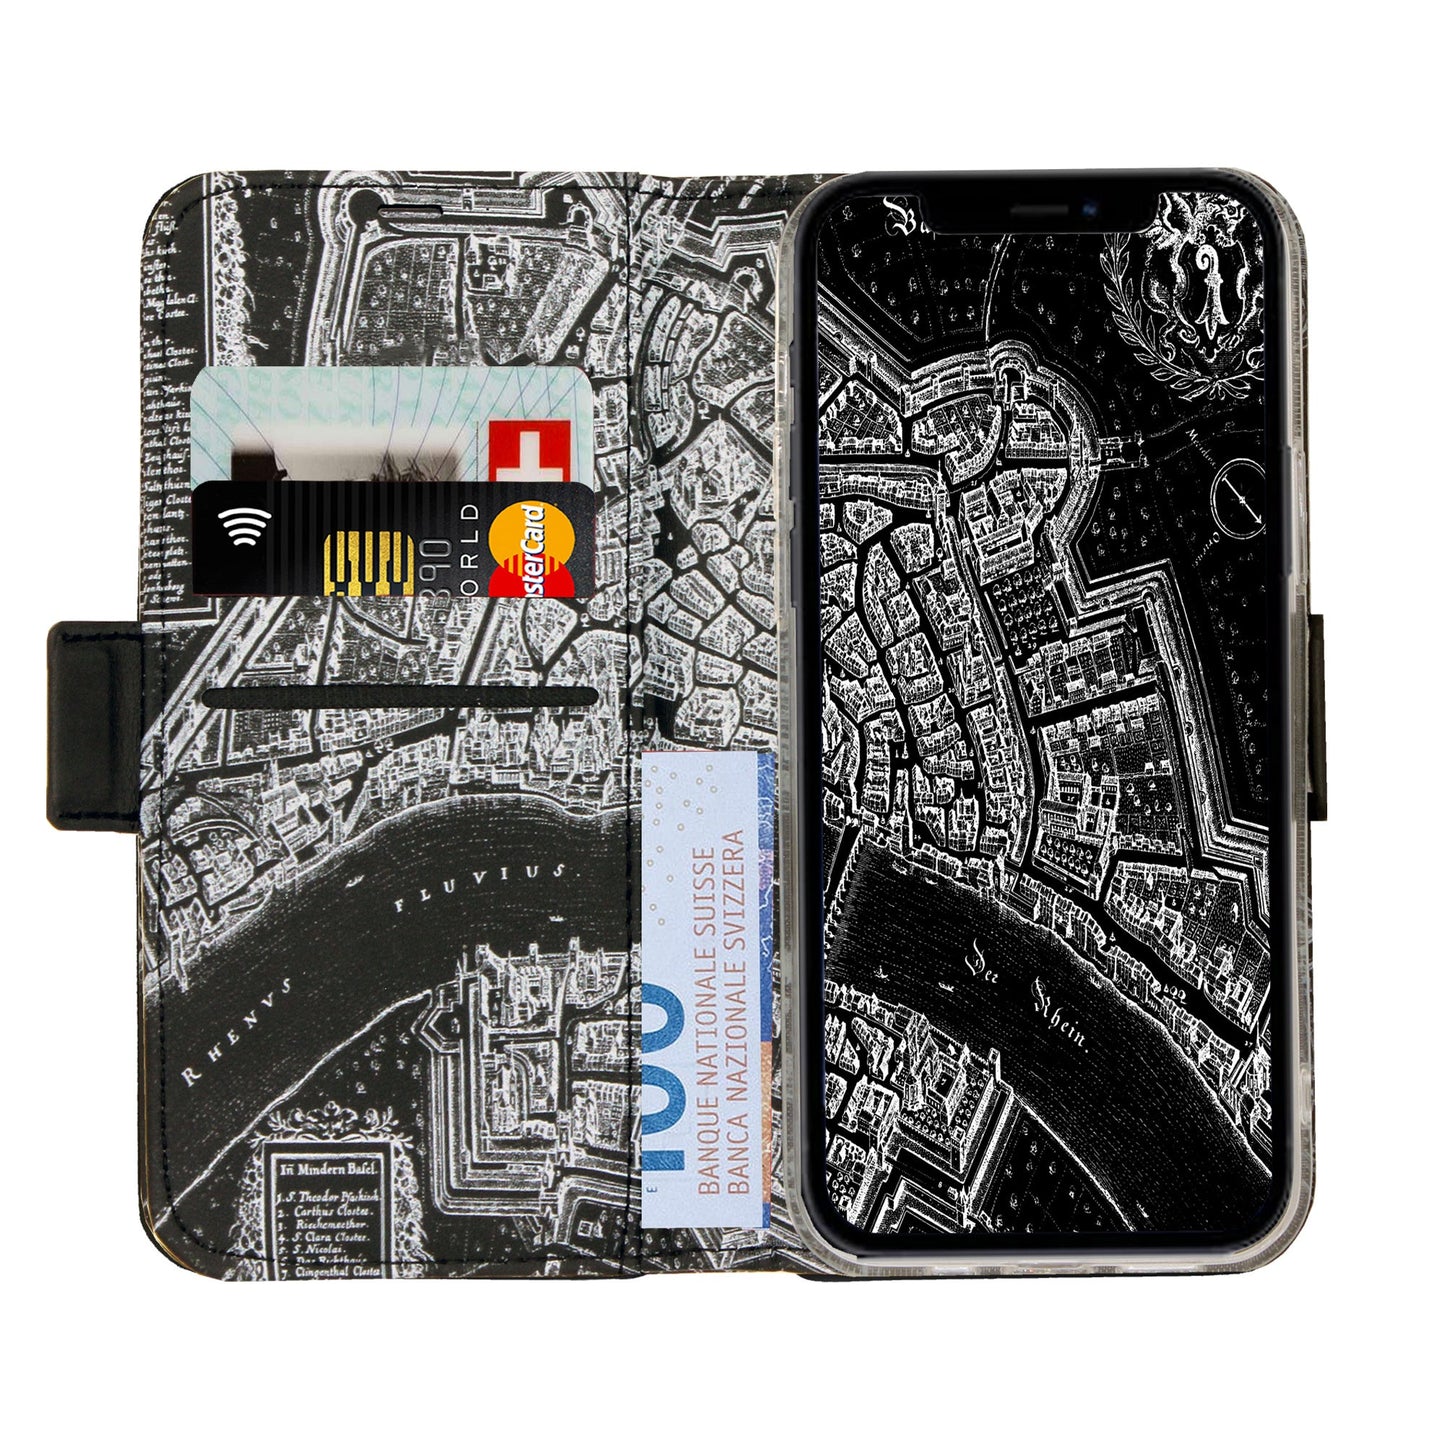 Basel Merian Negative Victor Case for iPhone X/XS